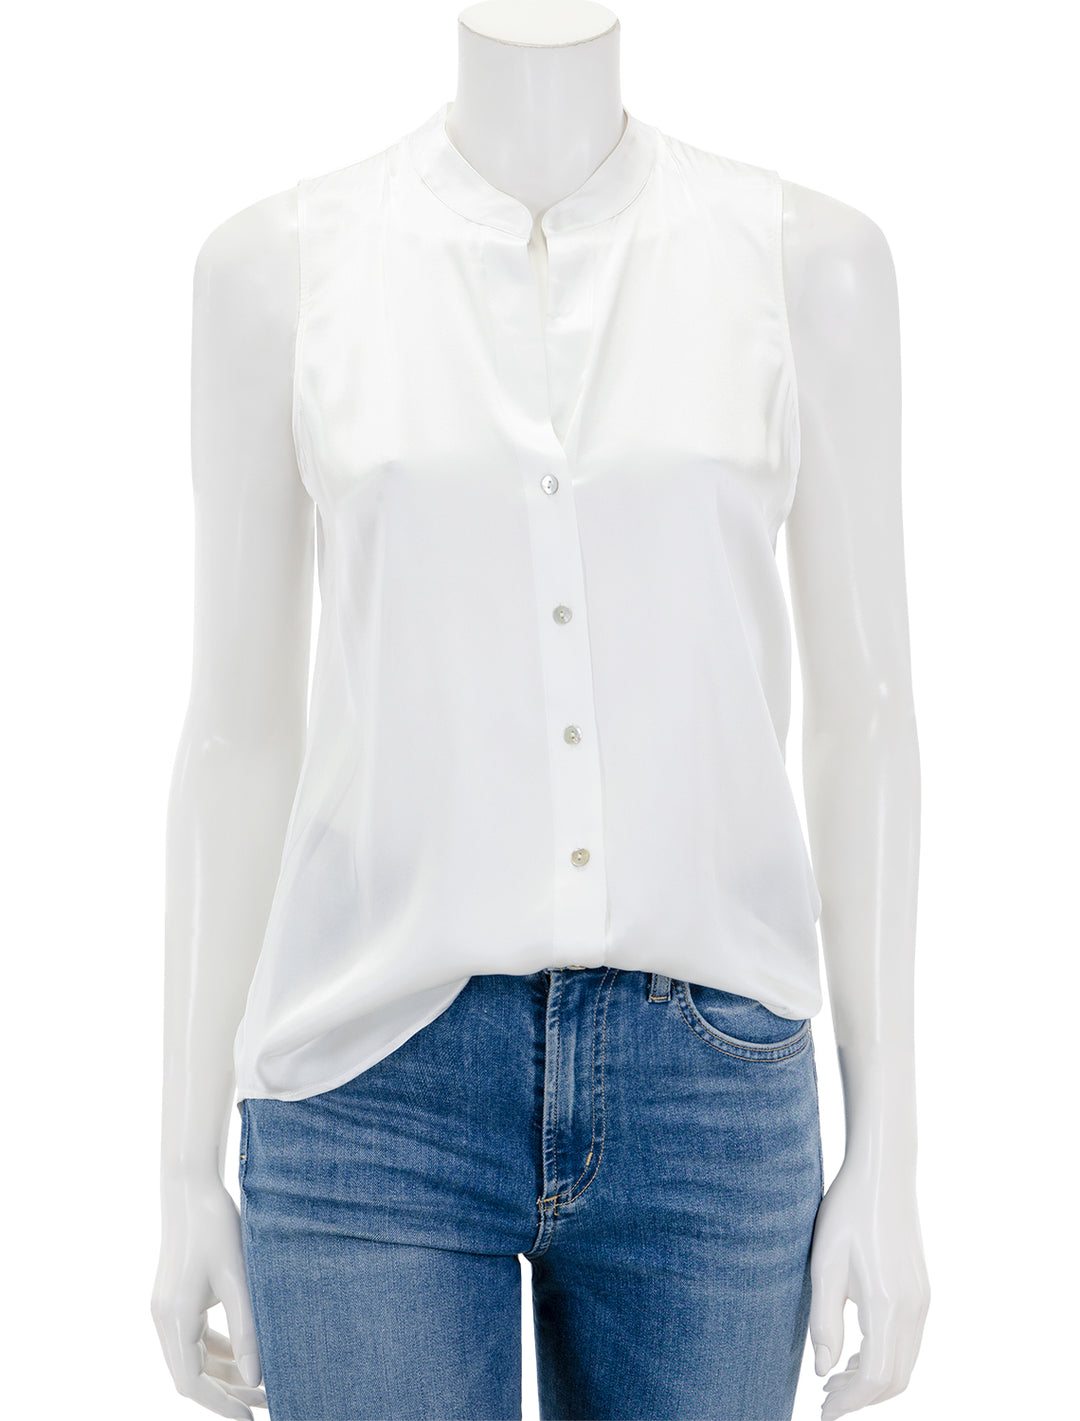 Front view of L'agence's hendrix band collar sleeveless blouse in white.